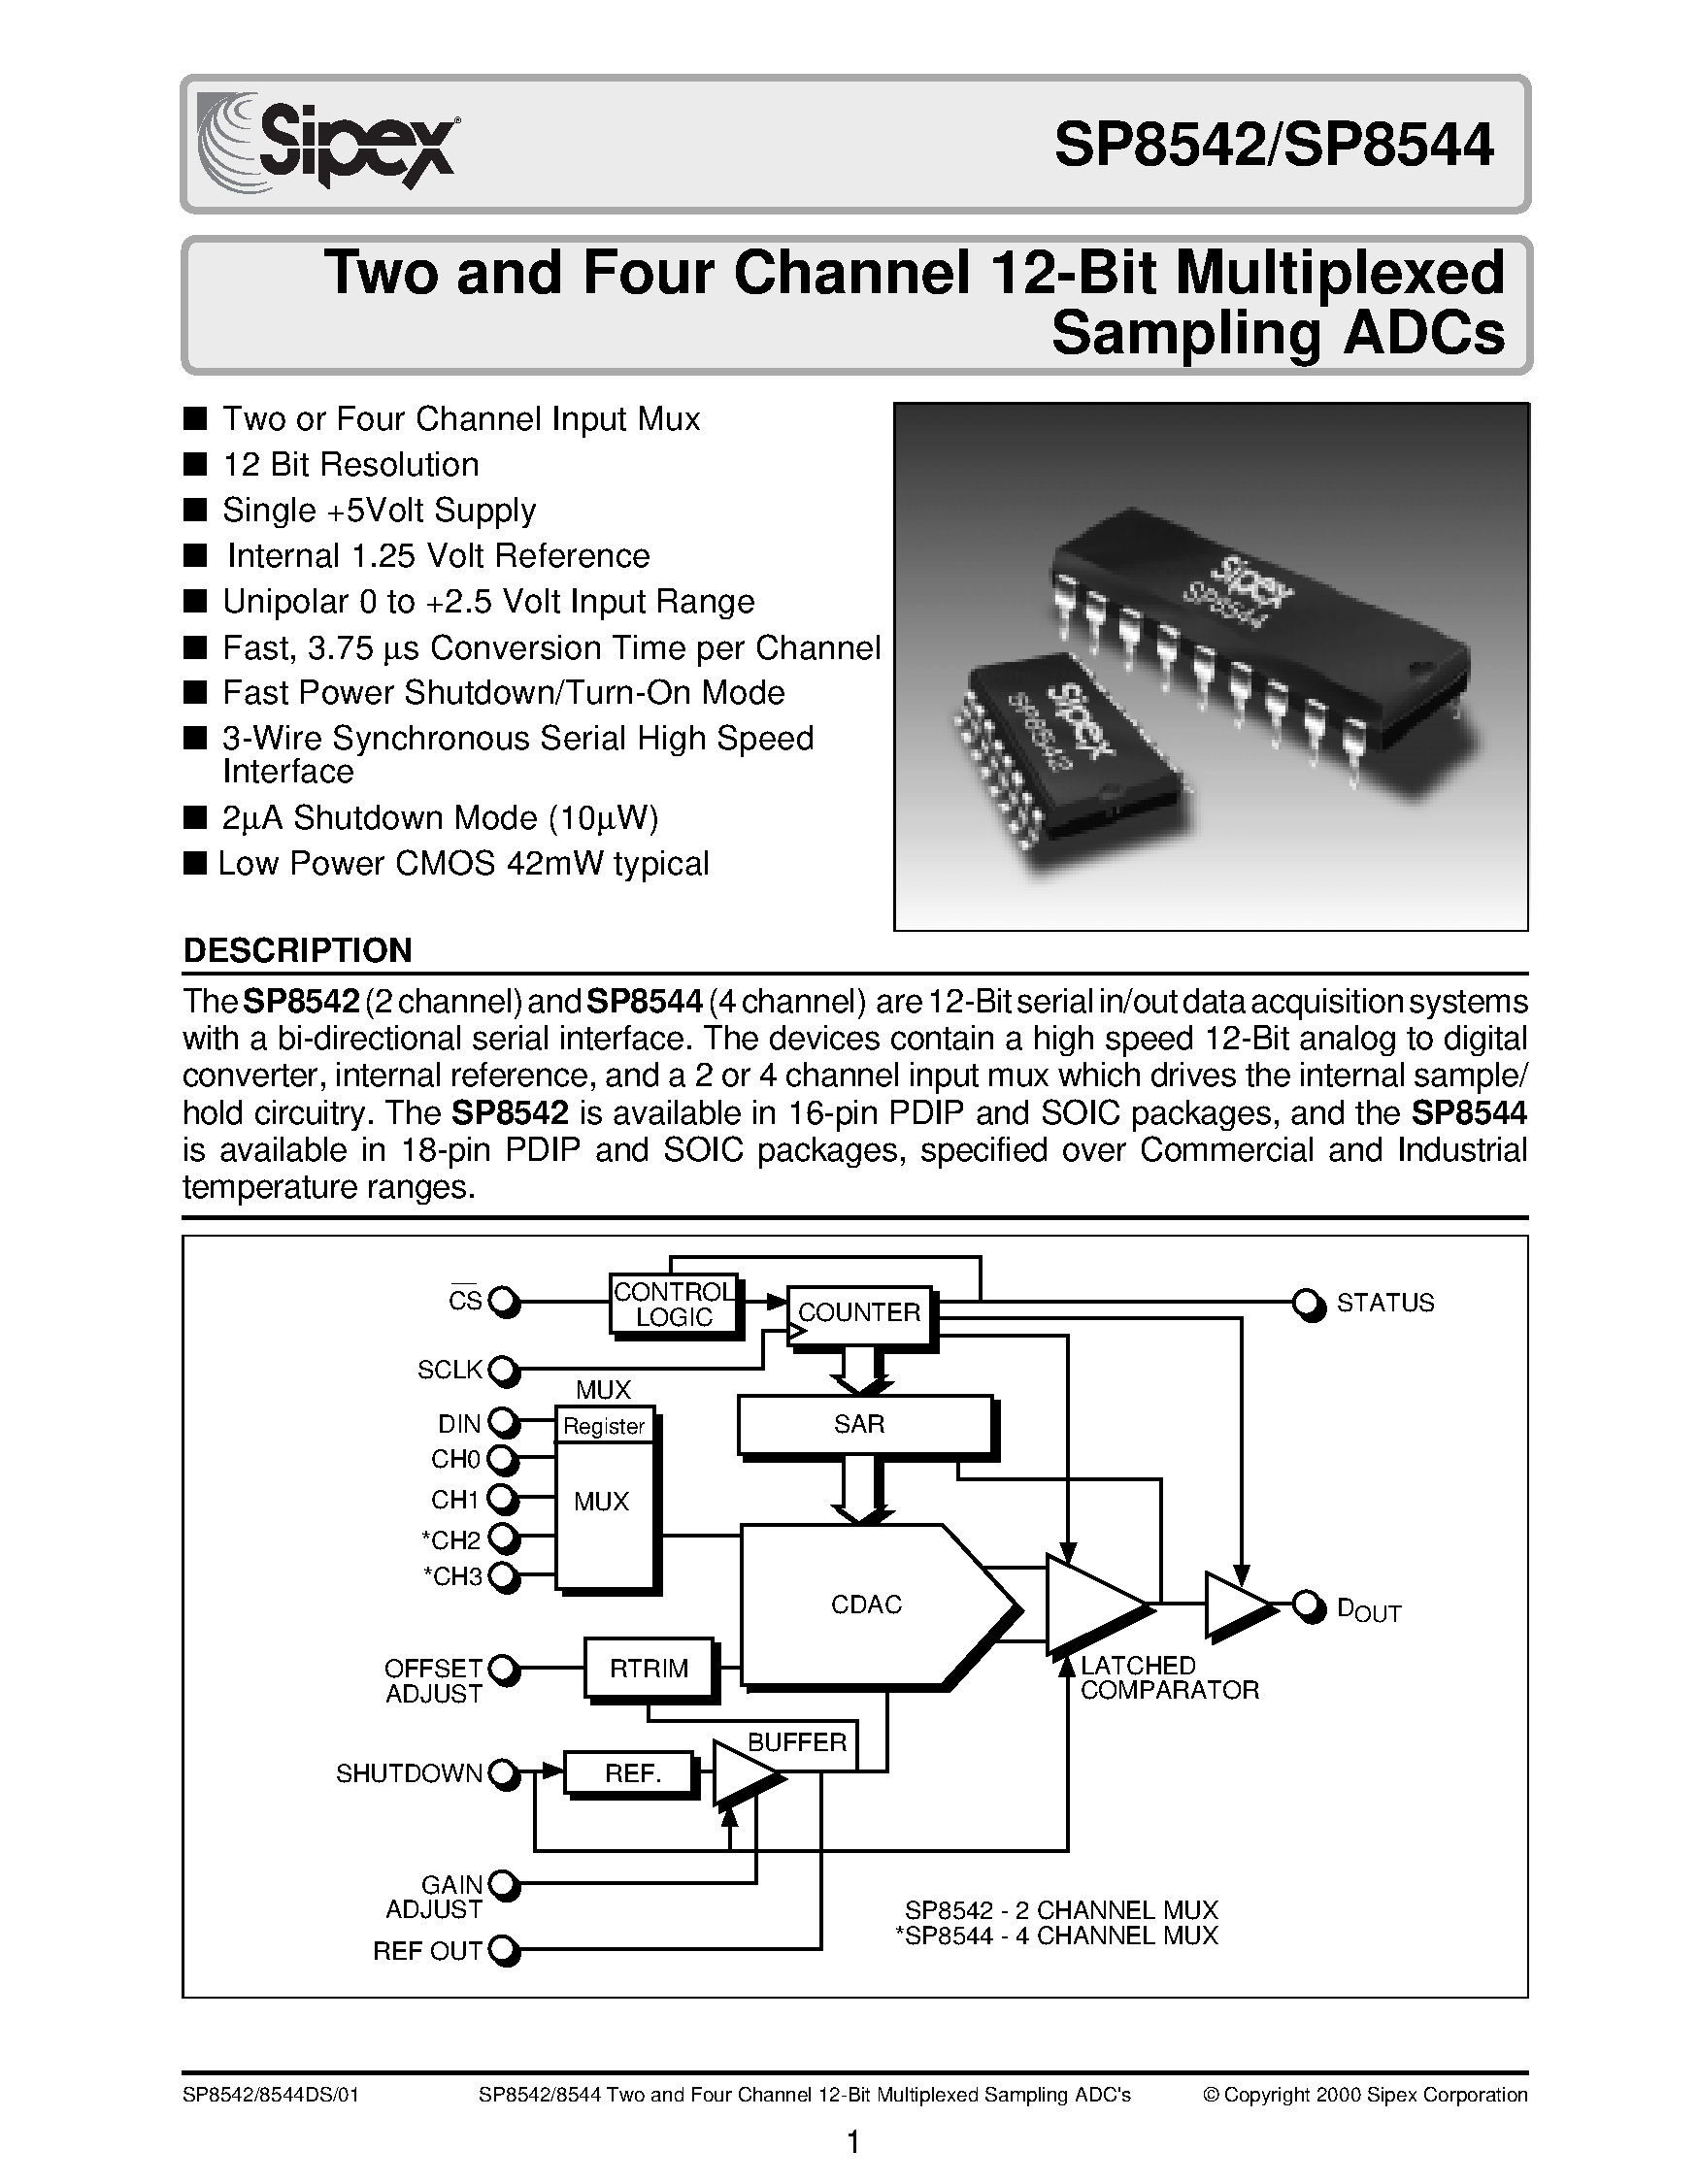 Datasheet SP8544BN - Two and Four Channel 12-Bit Multiplexed Sampling ADCs page 1